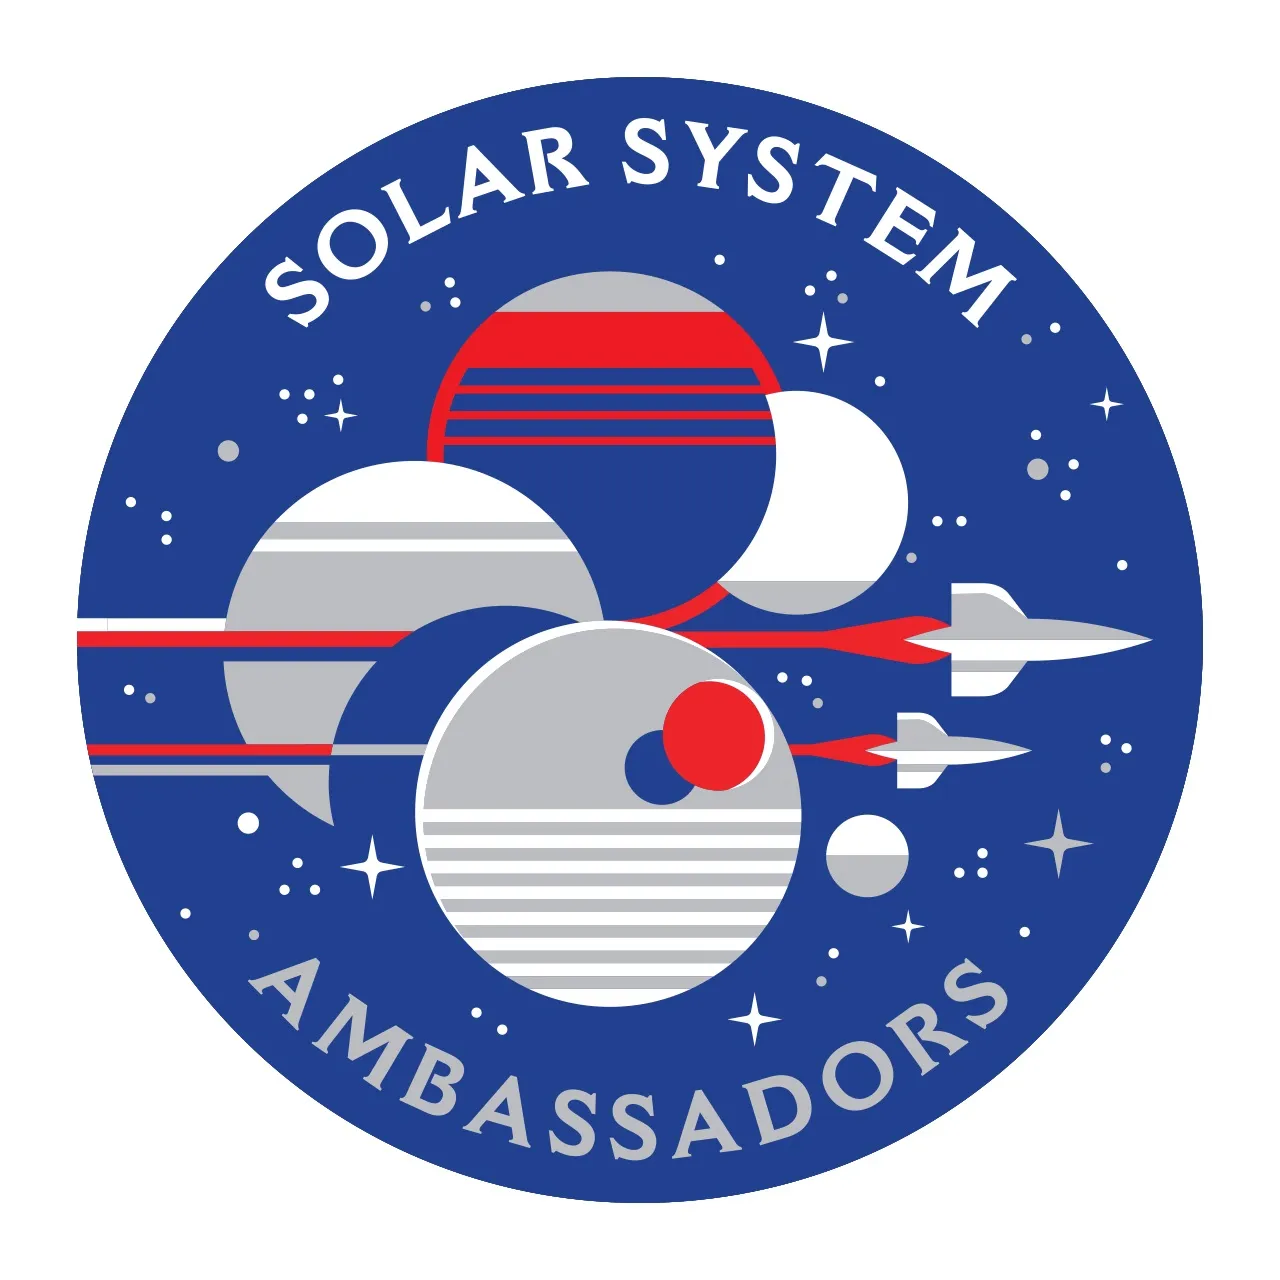 Solar System Ambassadors Logo: blue background lettering in white, spheres in white red and blue with rockets flying past from left to right